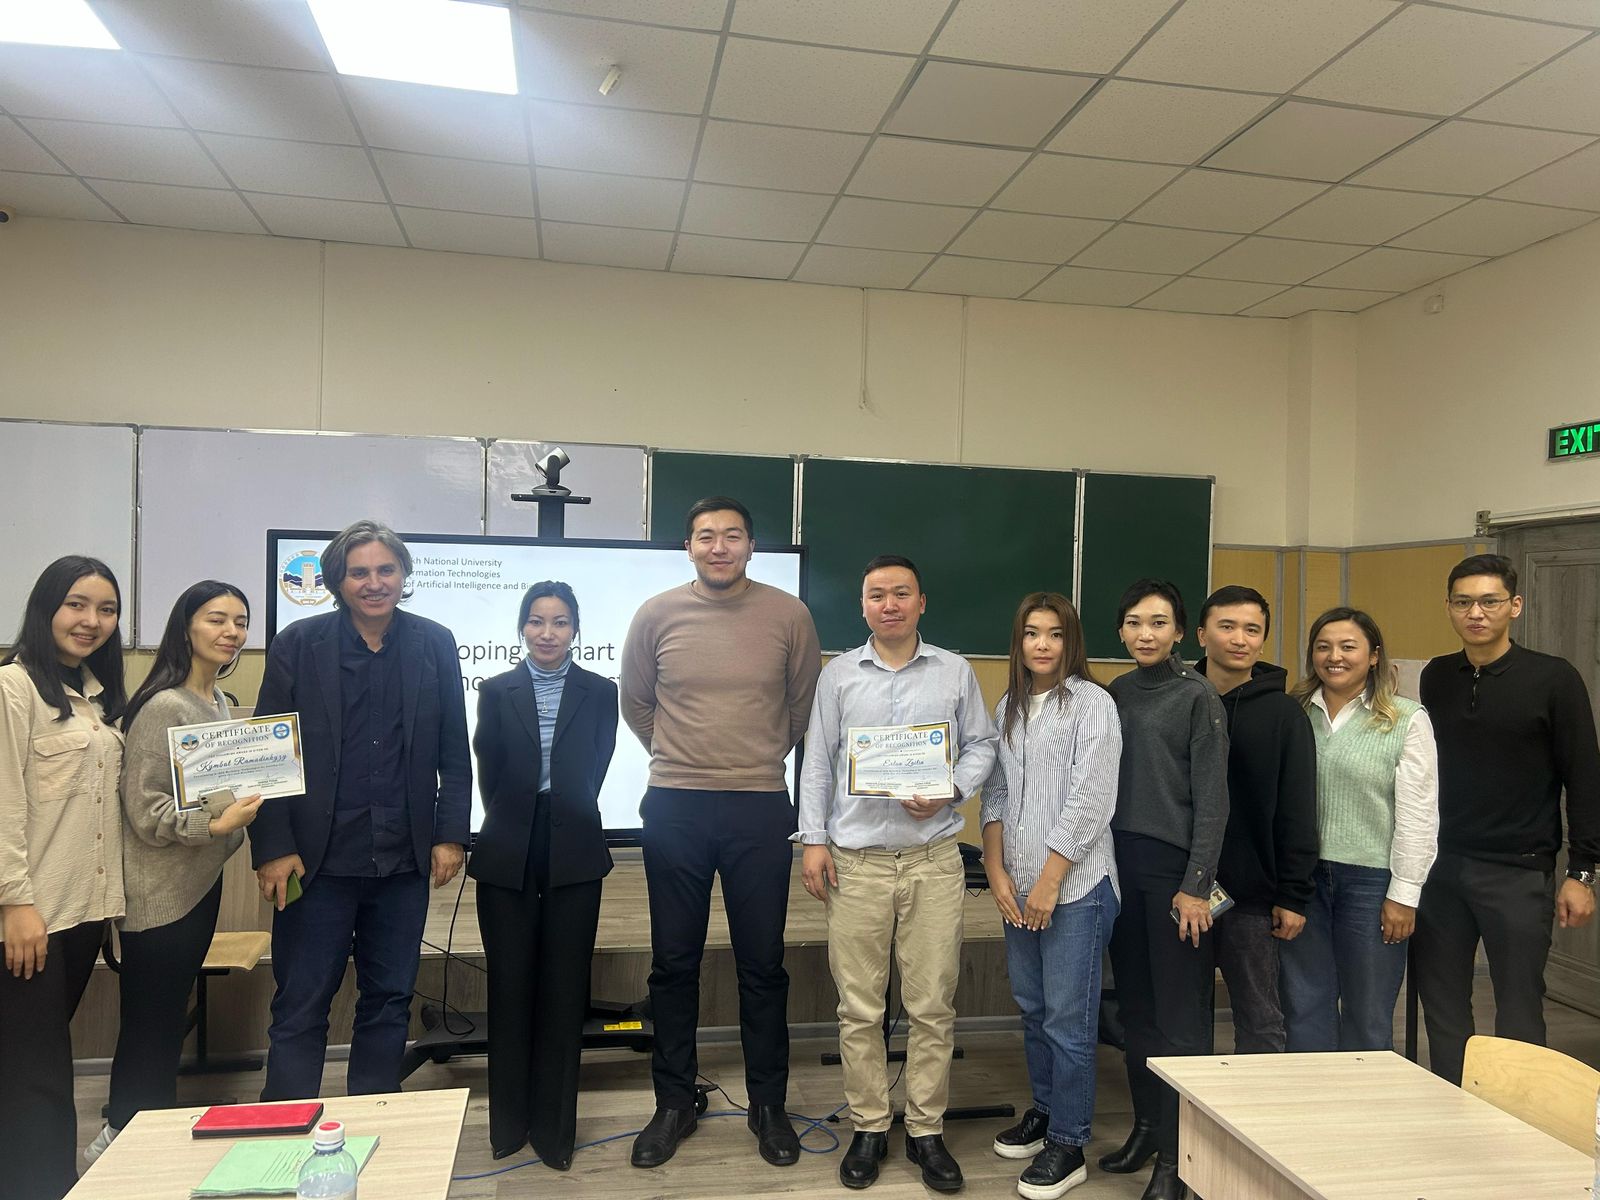 Doctoral students of the Department of Artificial Intelligence and Big Data held a Workshop for PhD students IEEE "Technologies for everyday life" Program with professor Octavian within the framework of SDG 17.